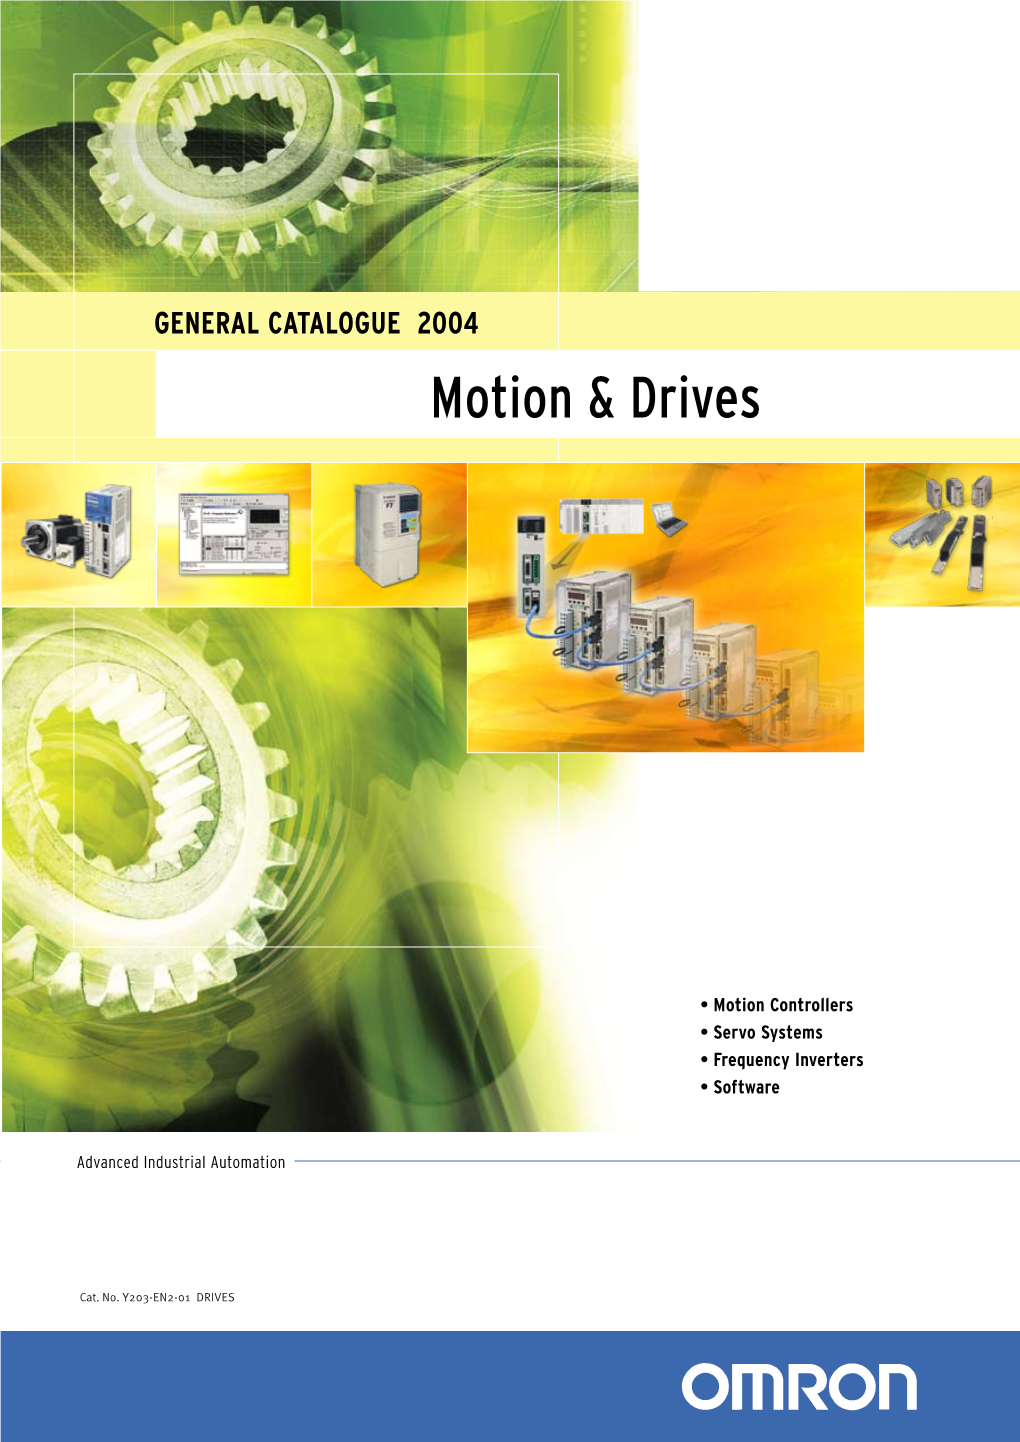 Motion & Drives